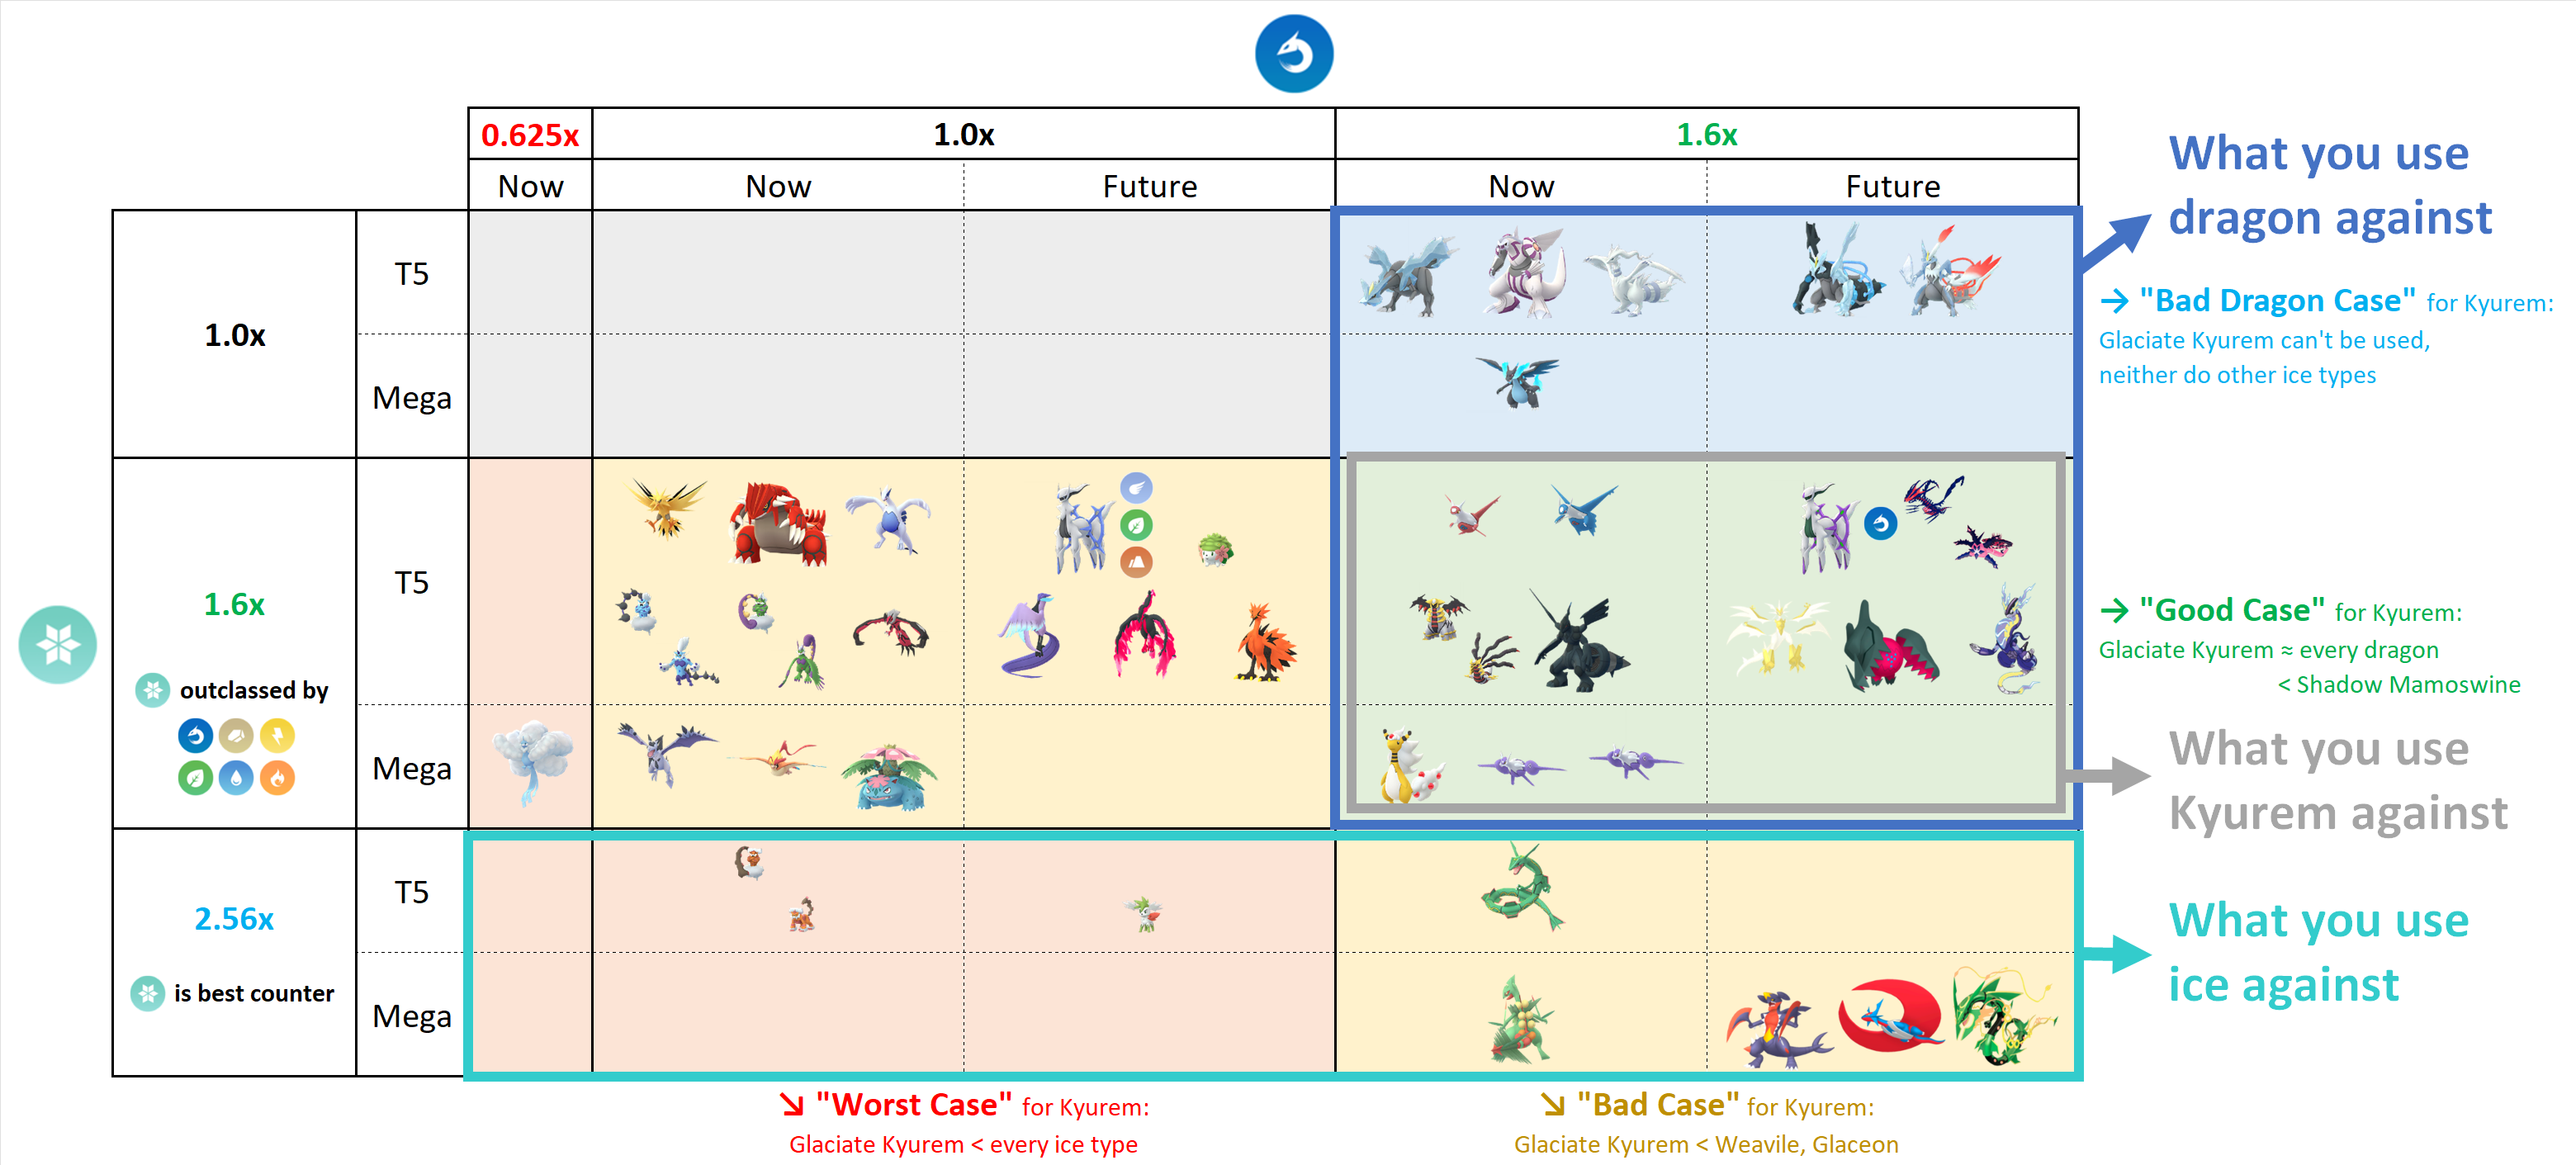 [Analysis] Glaciate Kyurem, Mega Glalie and other ice-type raid attackers